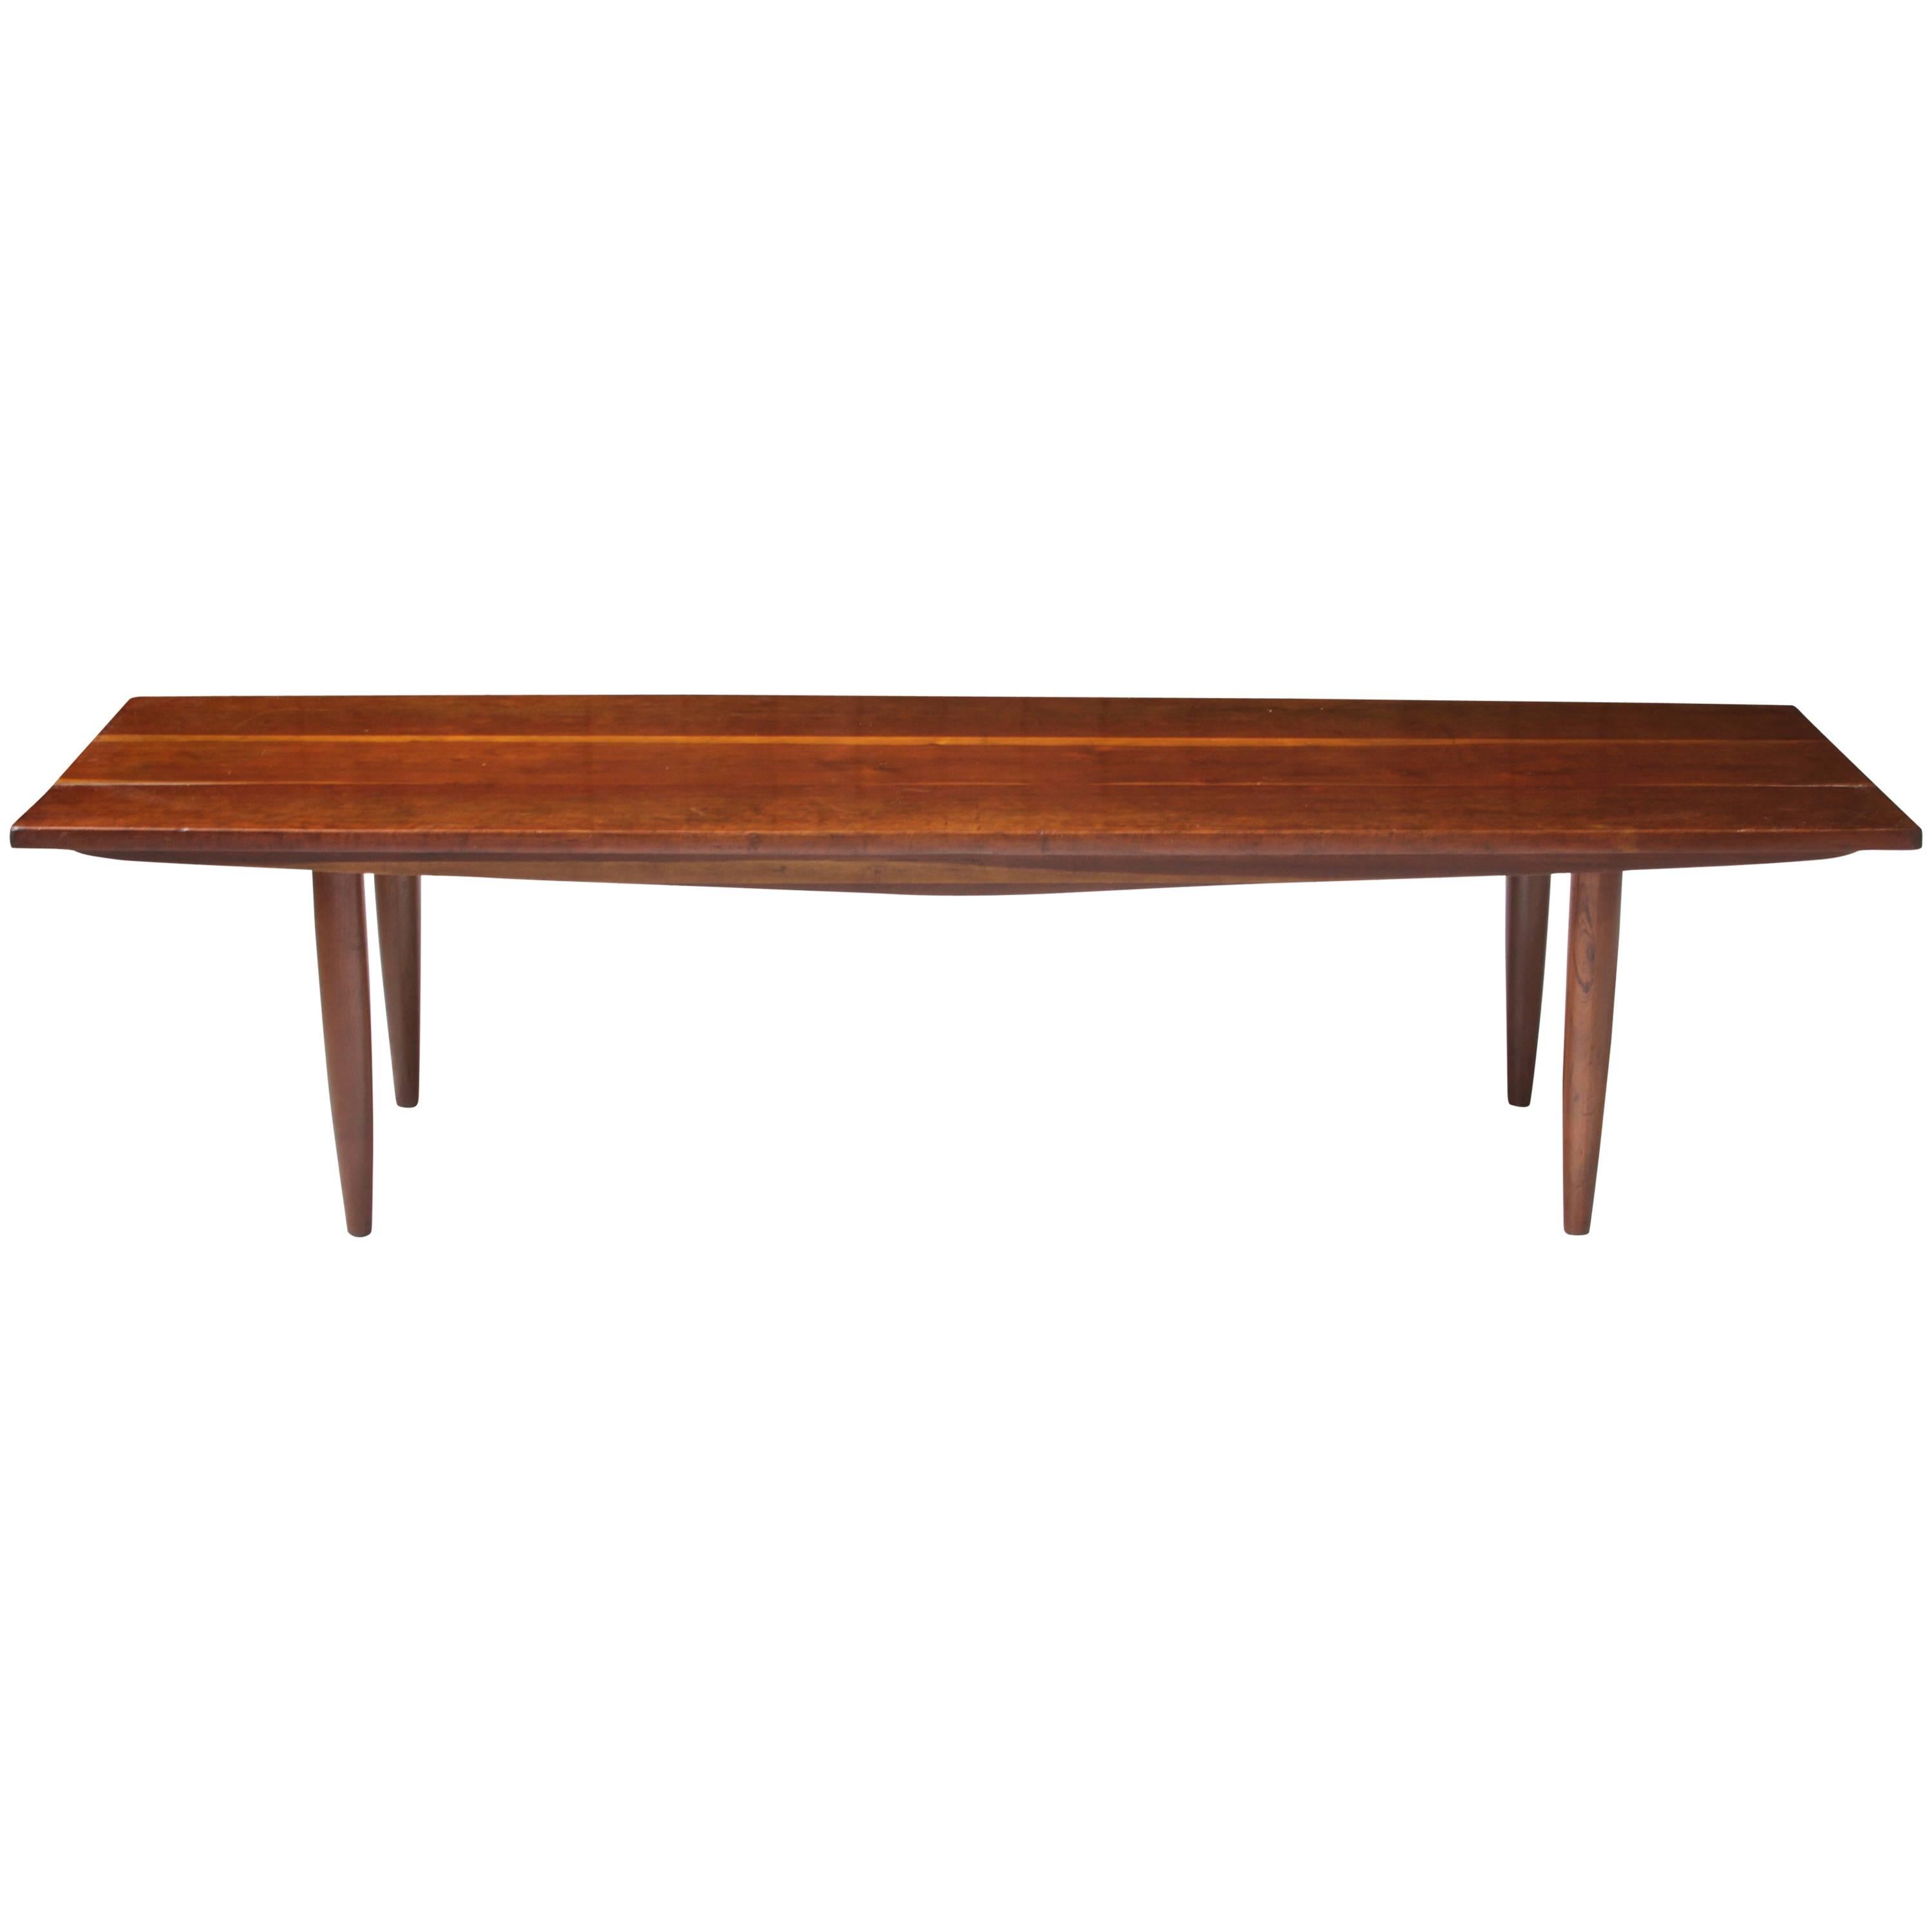 Vintage Studio Movement Coffee Table by Phillip Lloyd Powell in Cherry, 1960s For Sale